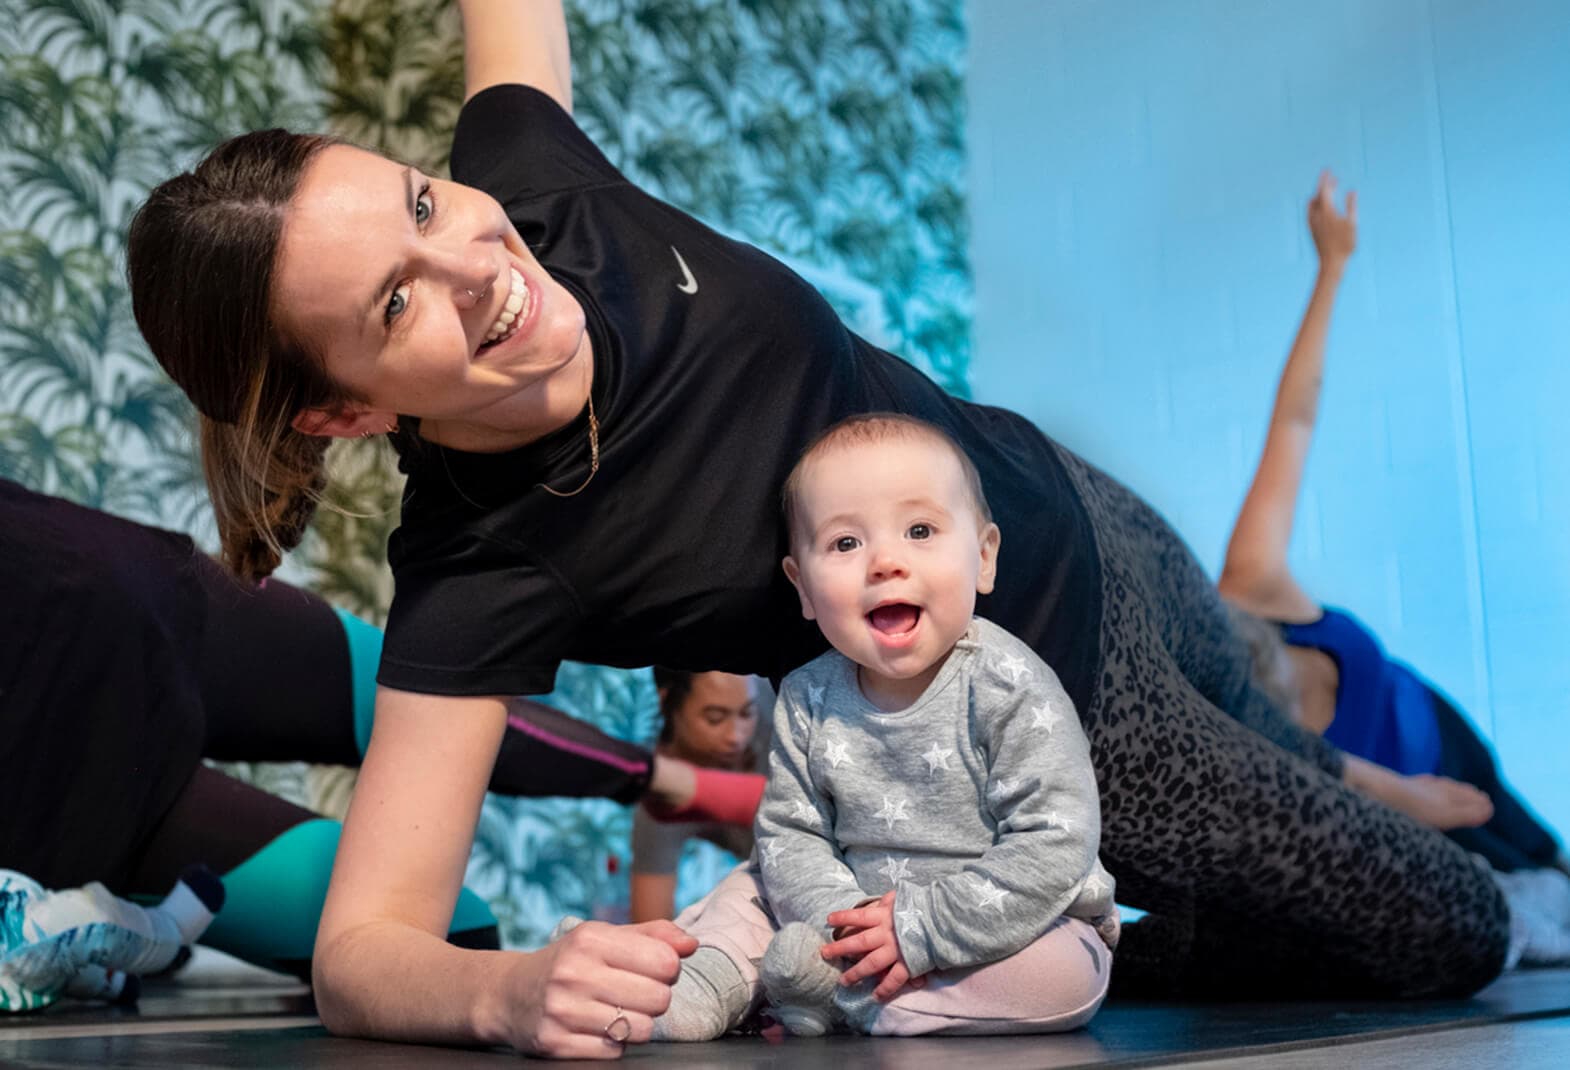 A mum works out on a yoga mat in a gym gear with her baby, both are smiling at the camera 